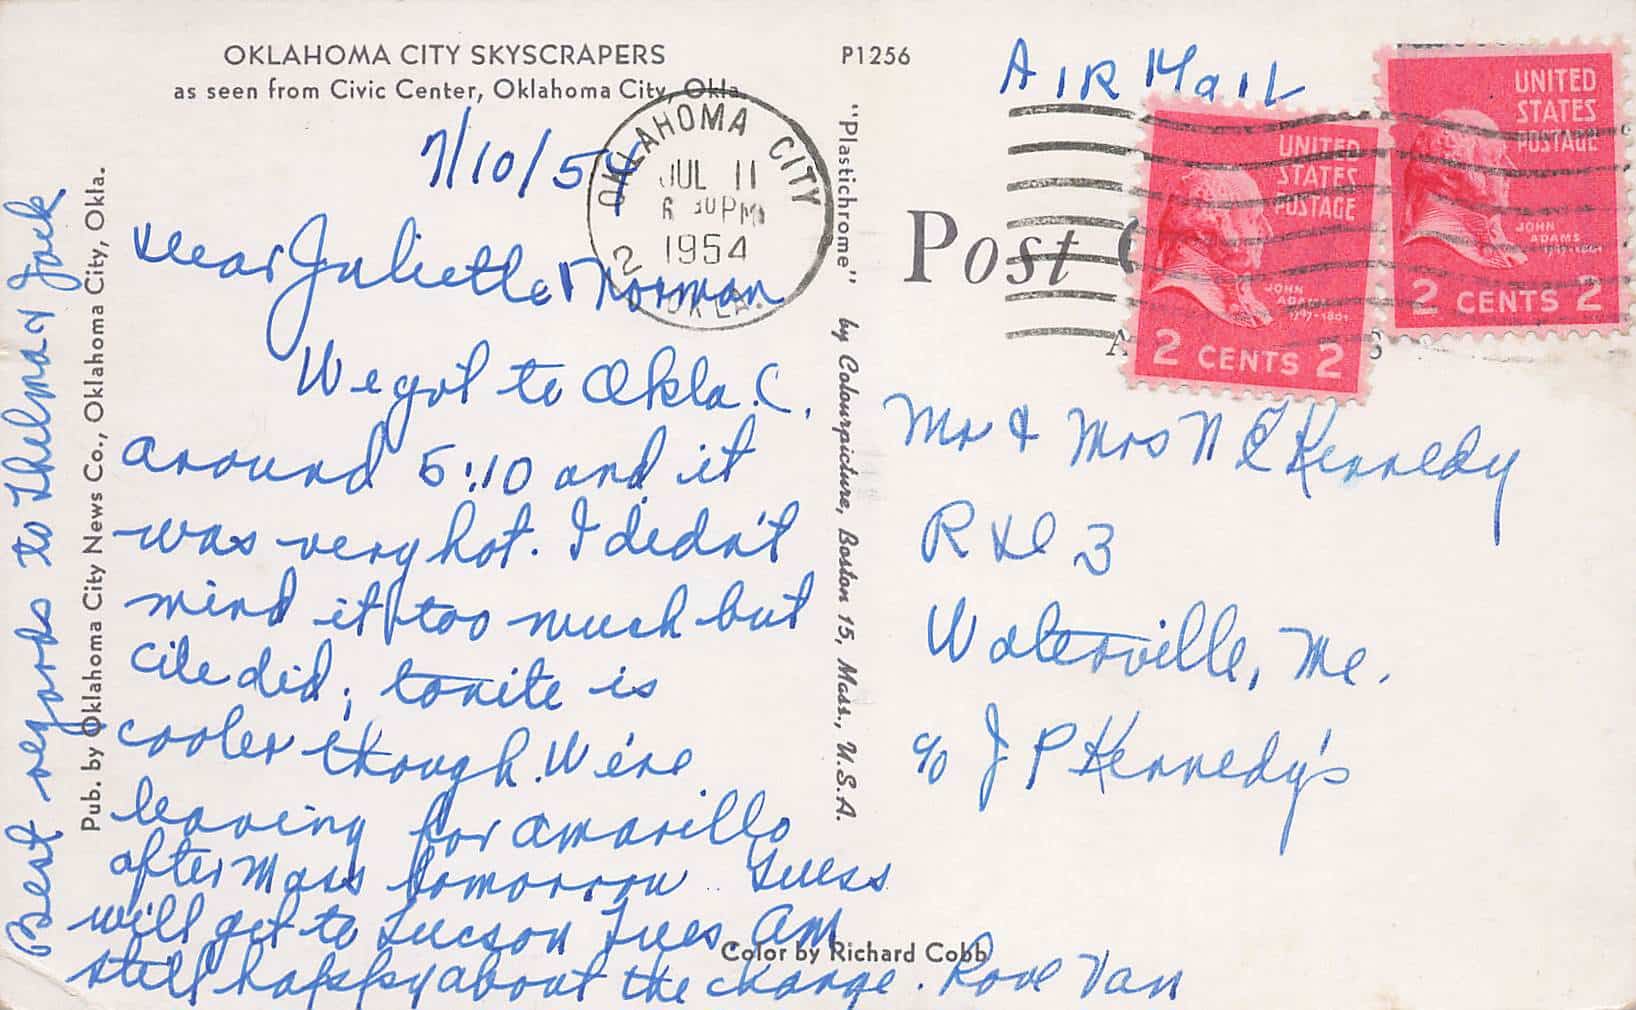 The Oklahoma City Skyscraper postcard back with a handwritten note on it.